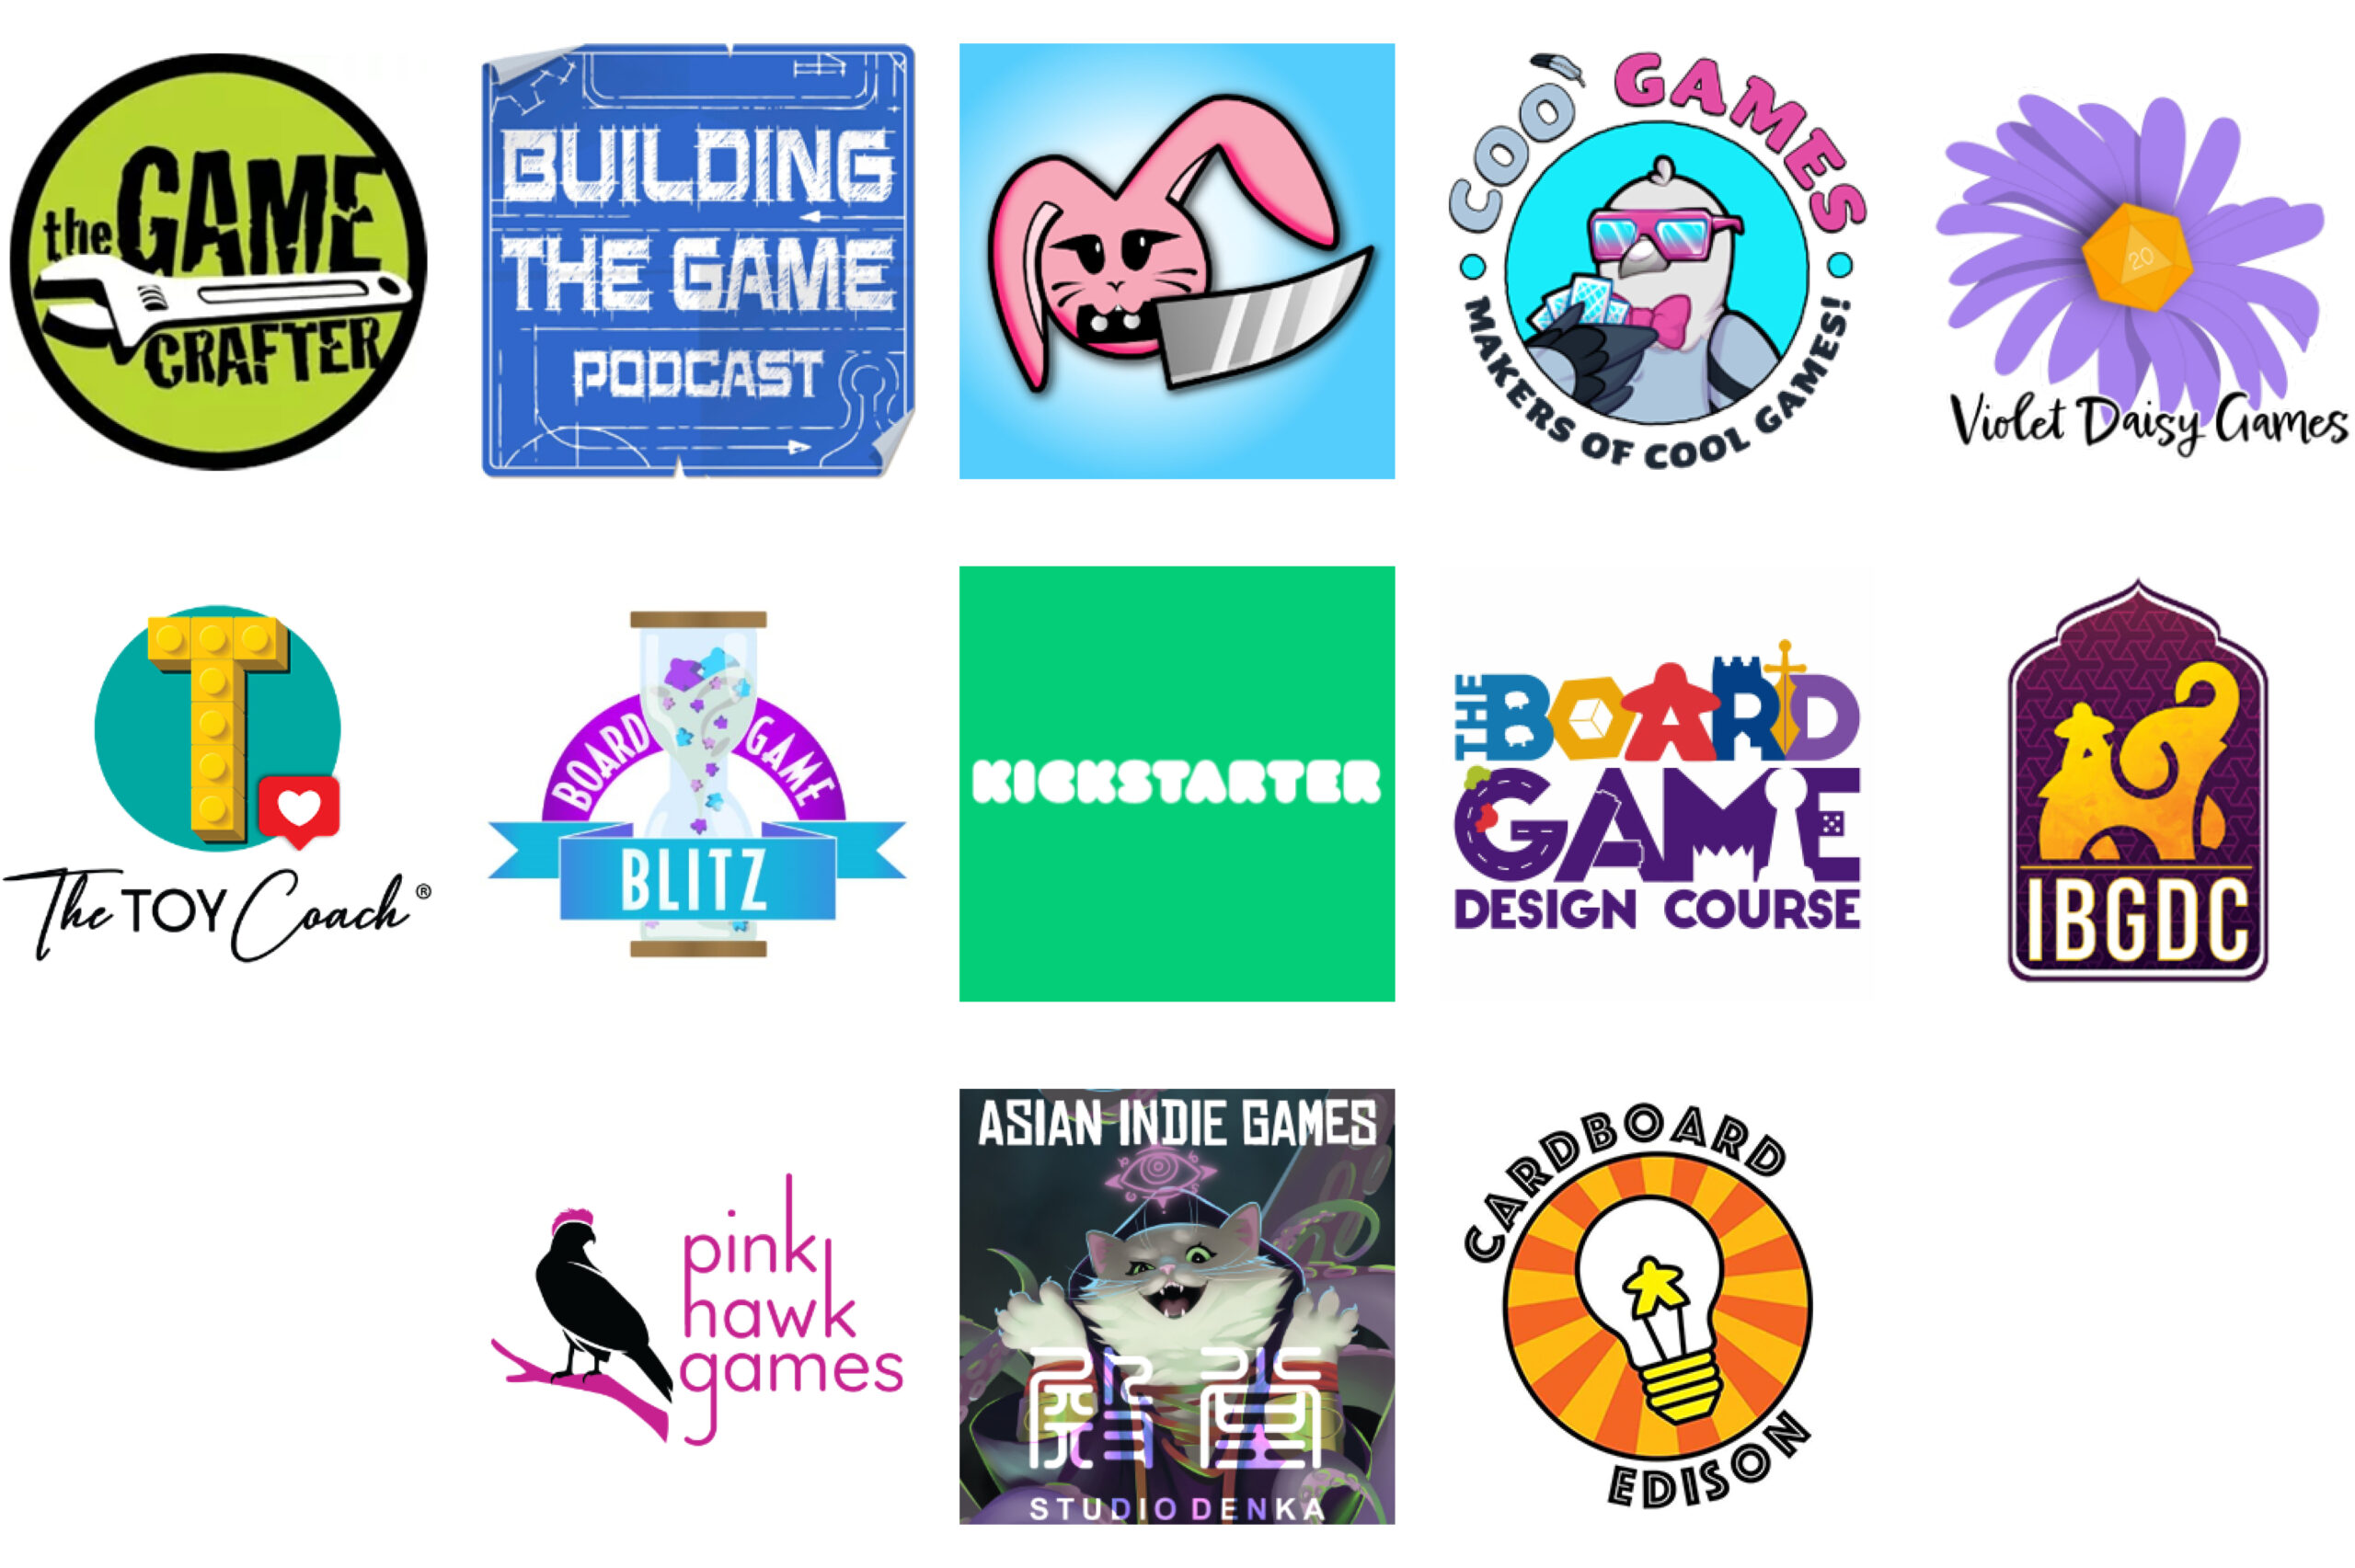 Sponsor logos for Jan 2024: The Game Crafter, Building the Game Podcast, Knife Bunny, Coo Games, Violet Daisy Games, The Toy Coach, Board Game Blitz, Kickstarter, The Board Game Design Course, IBGDC, Pink Hawk Games, Studio Denka, Cardboard Edison